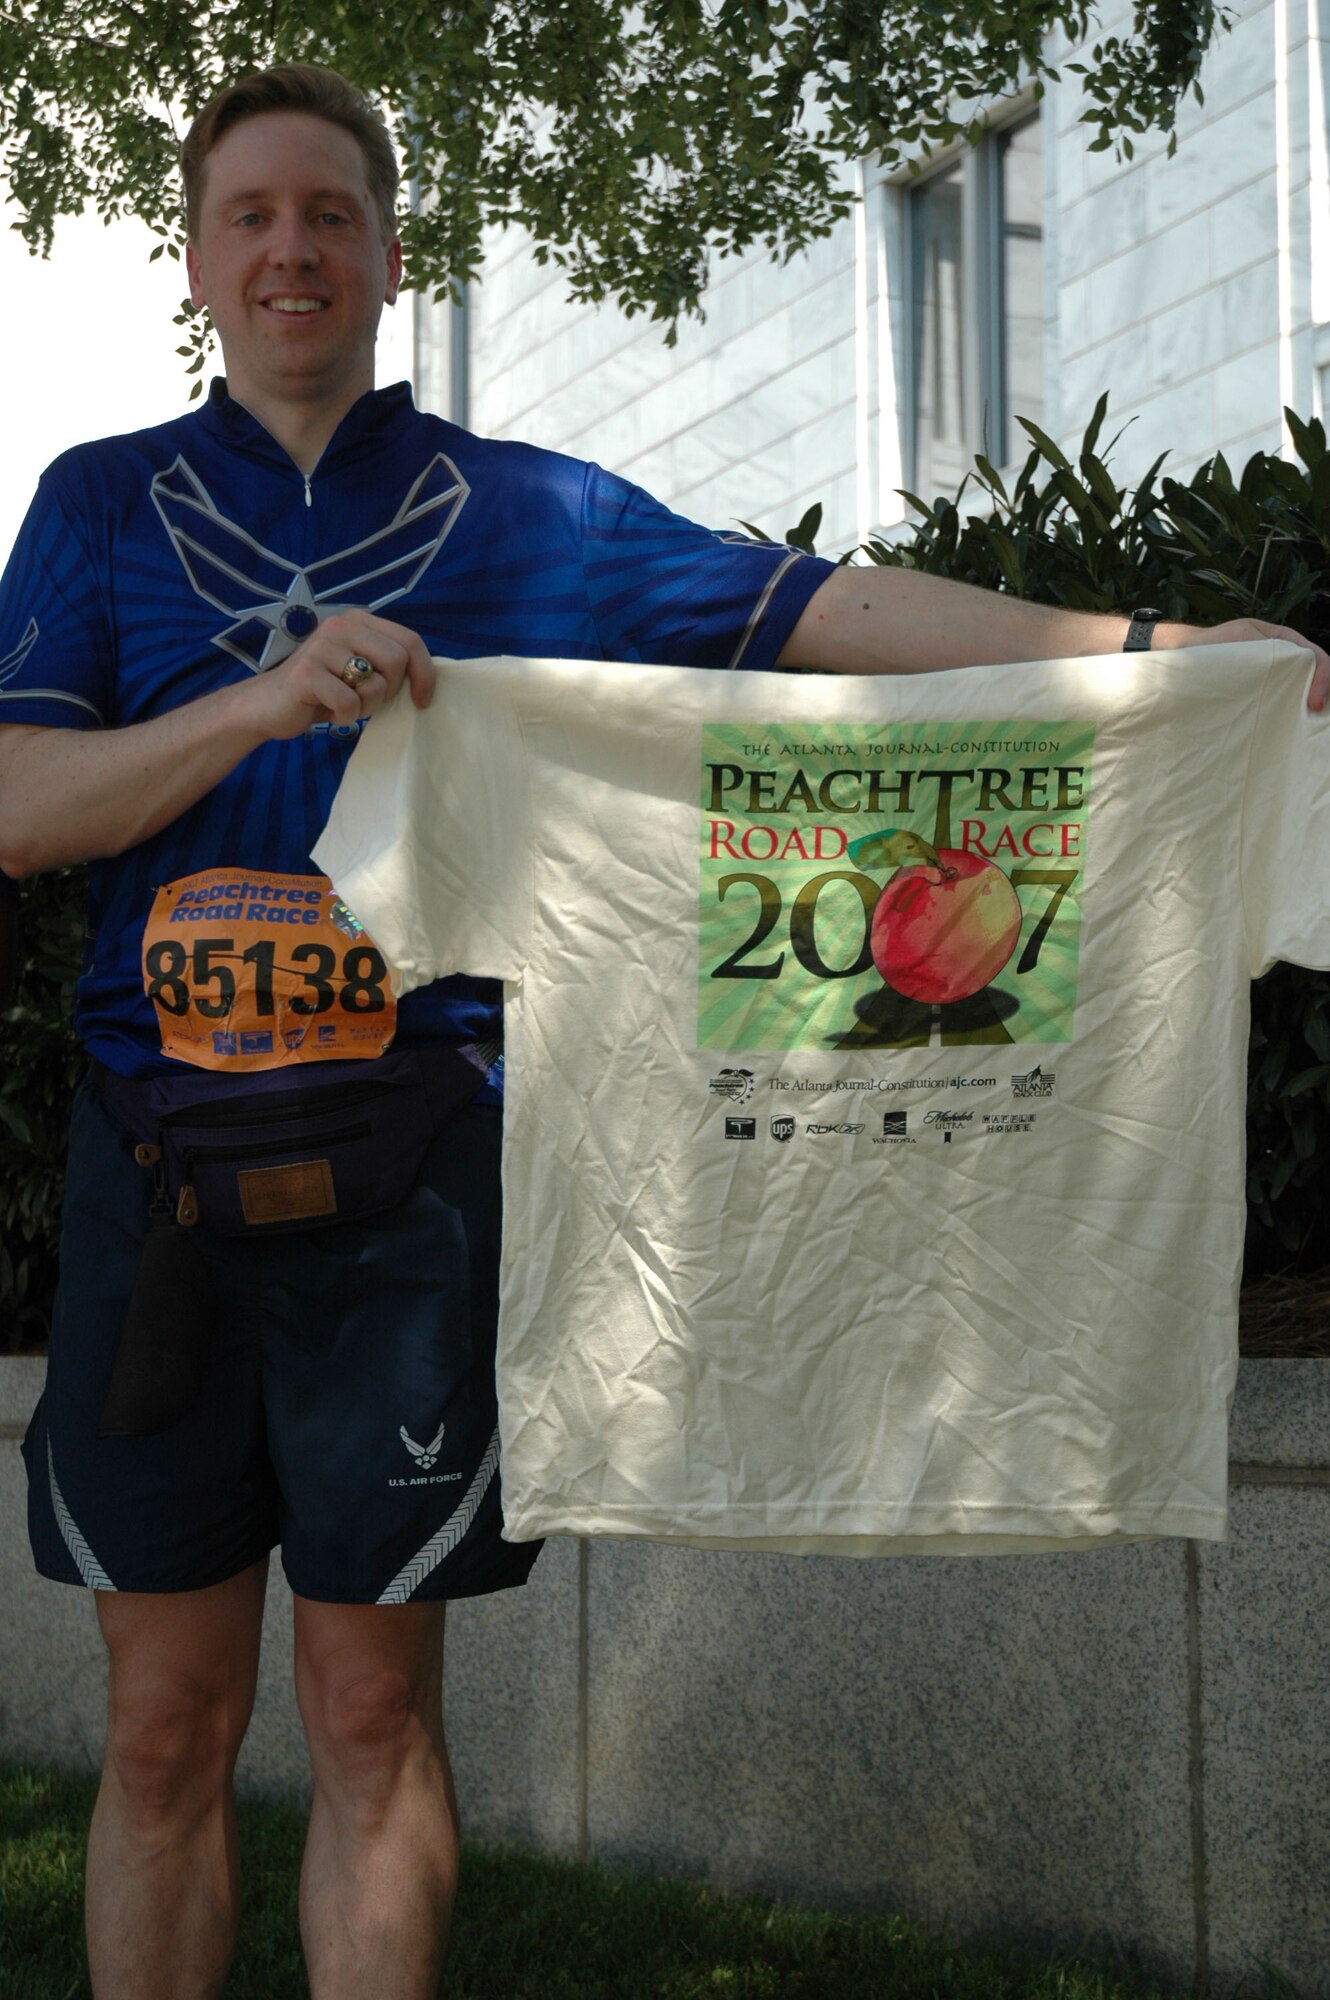 Maj. Mark Jordan, 94th Operations Group, Dobbins Air Reserve Base, Ga., proudly holds his Peachtree Road Race T-shirt after completing the annual July 4 run in downtown Atlanta. The shirts are a status symbol among runners, not only in the Southeast, but around the world. 